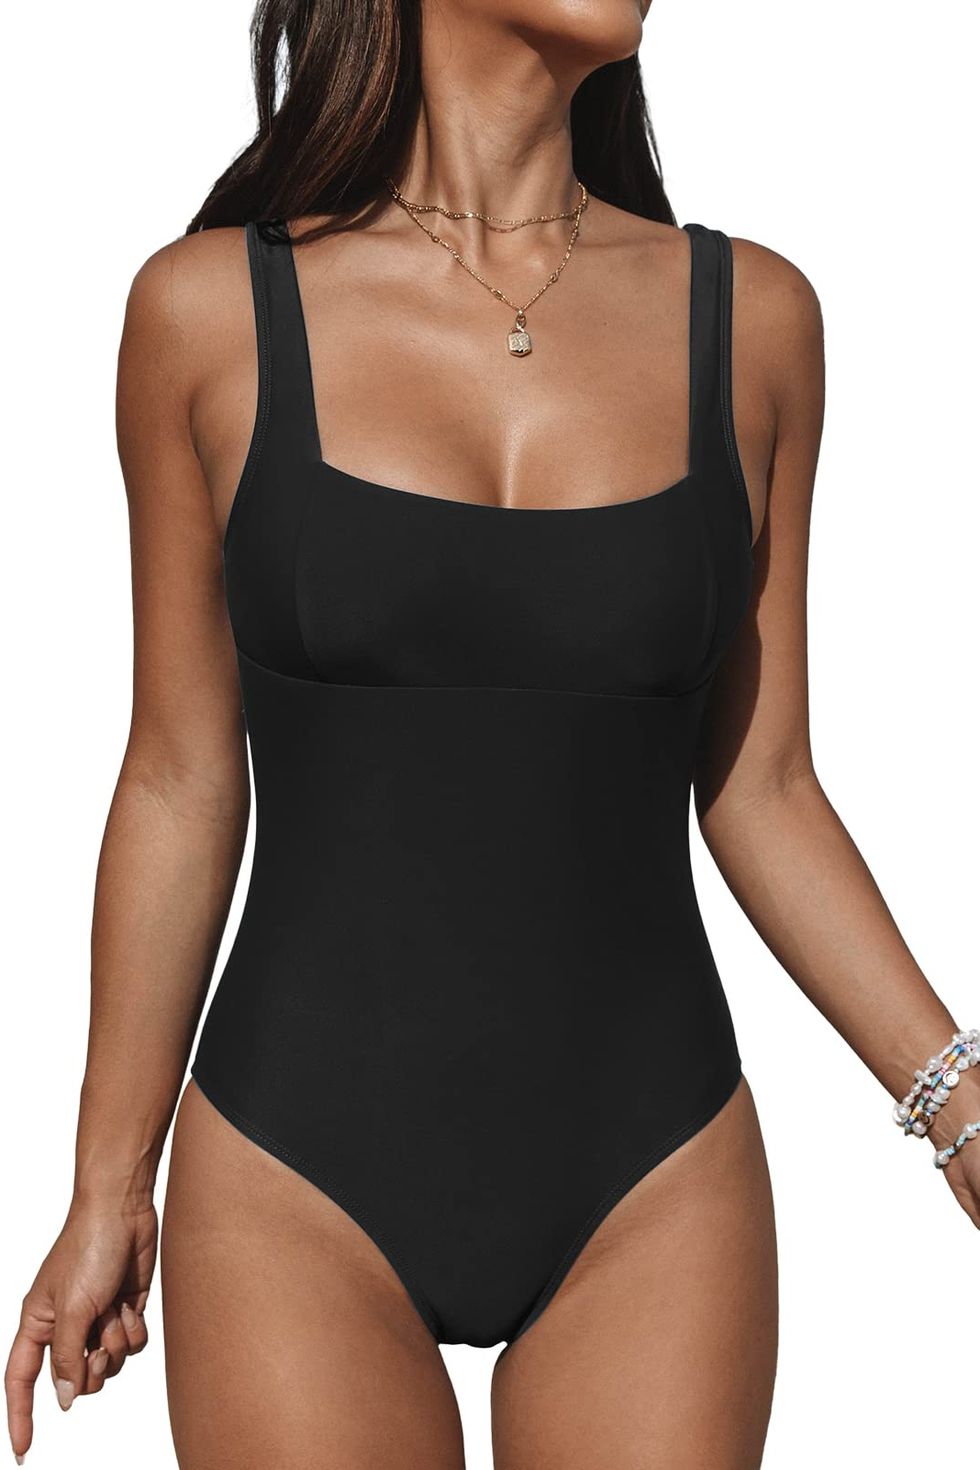 s Best-Selling One-Piece Is the Most Flattering Swimsuit